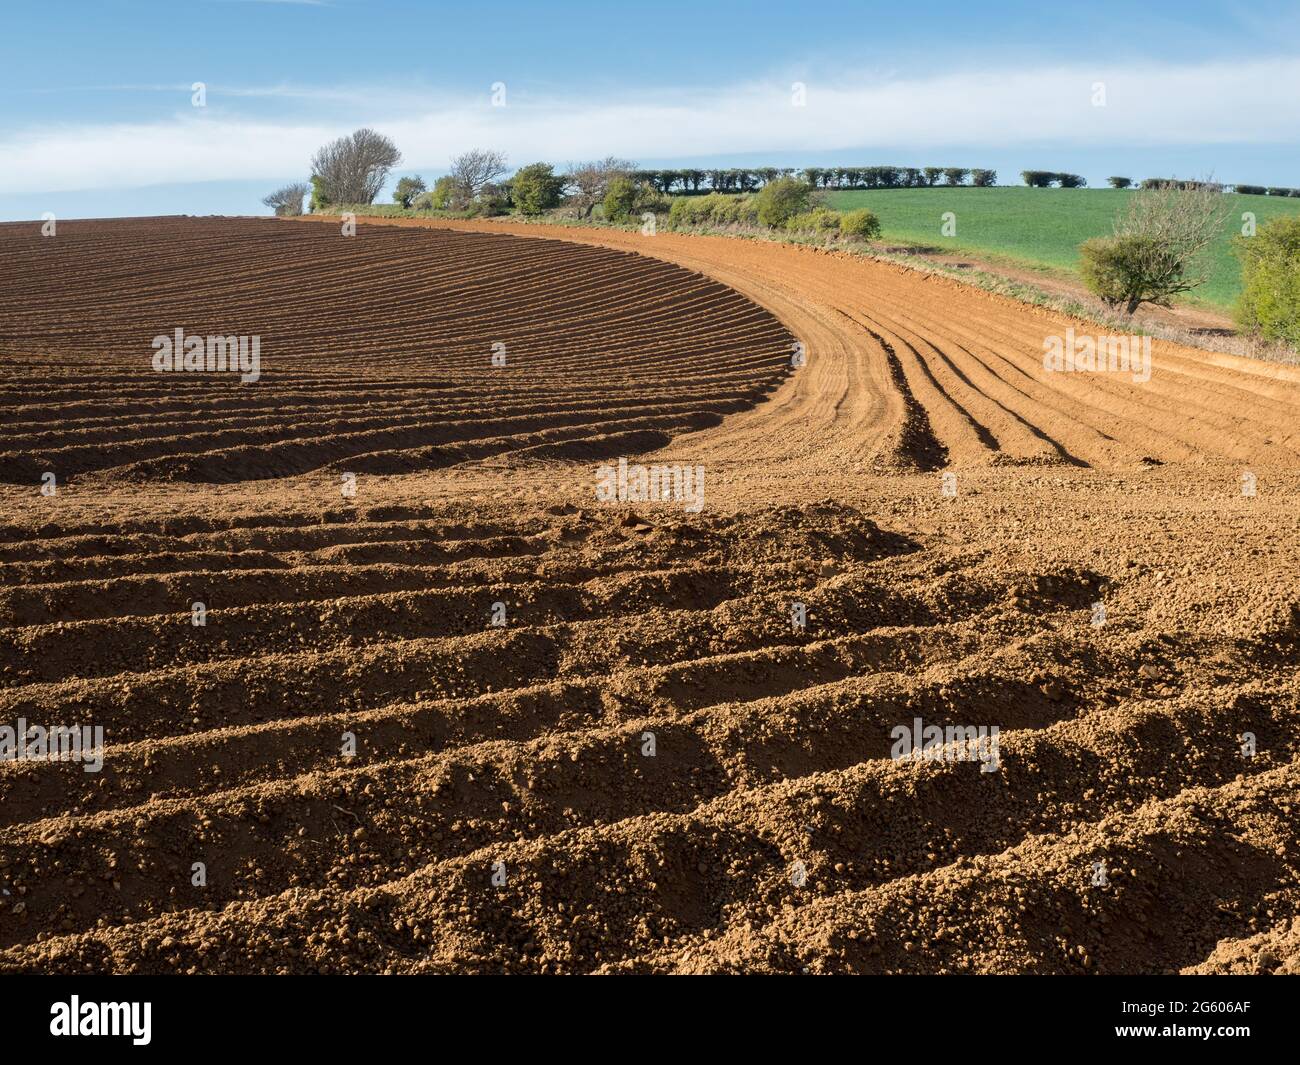 strong geometric shape pattern in curves and lines in a ploughed seeded field at golden hour side hard light under clear blue sky Stock Photo